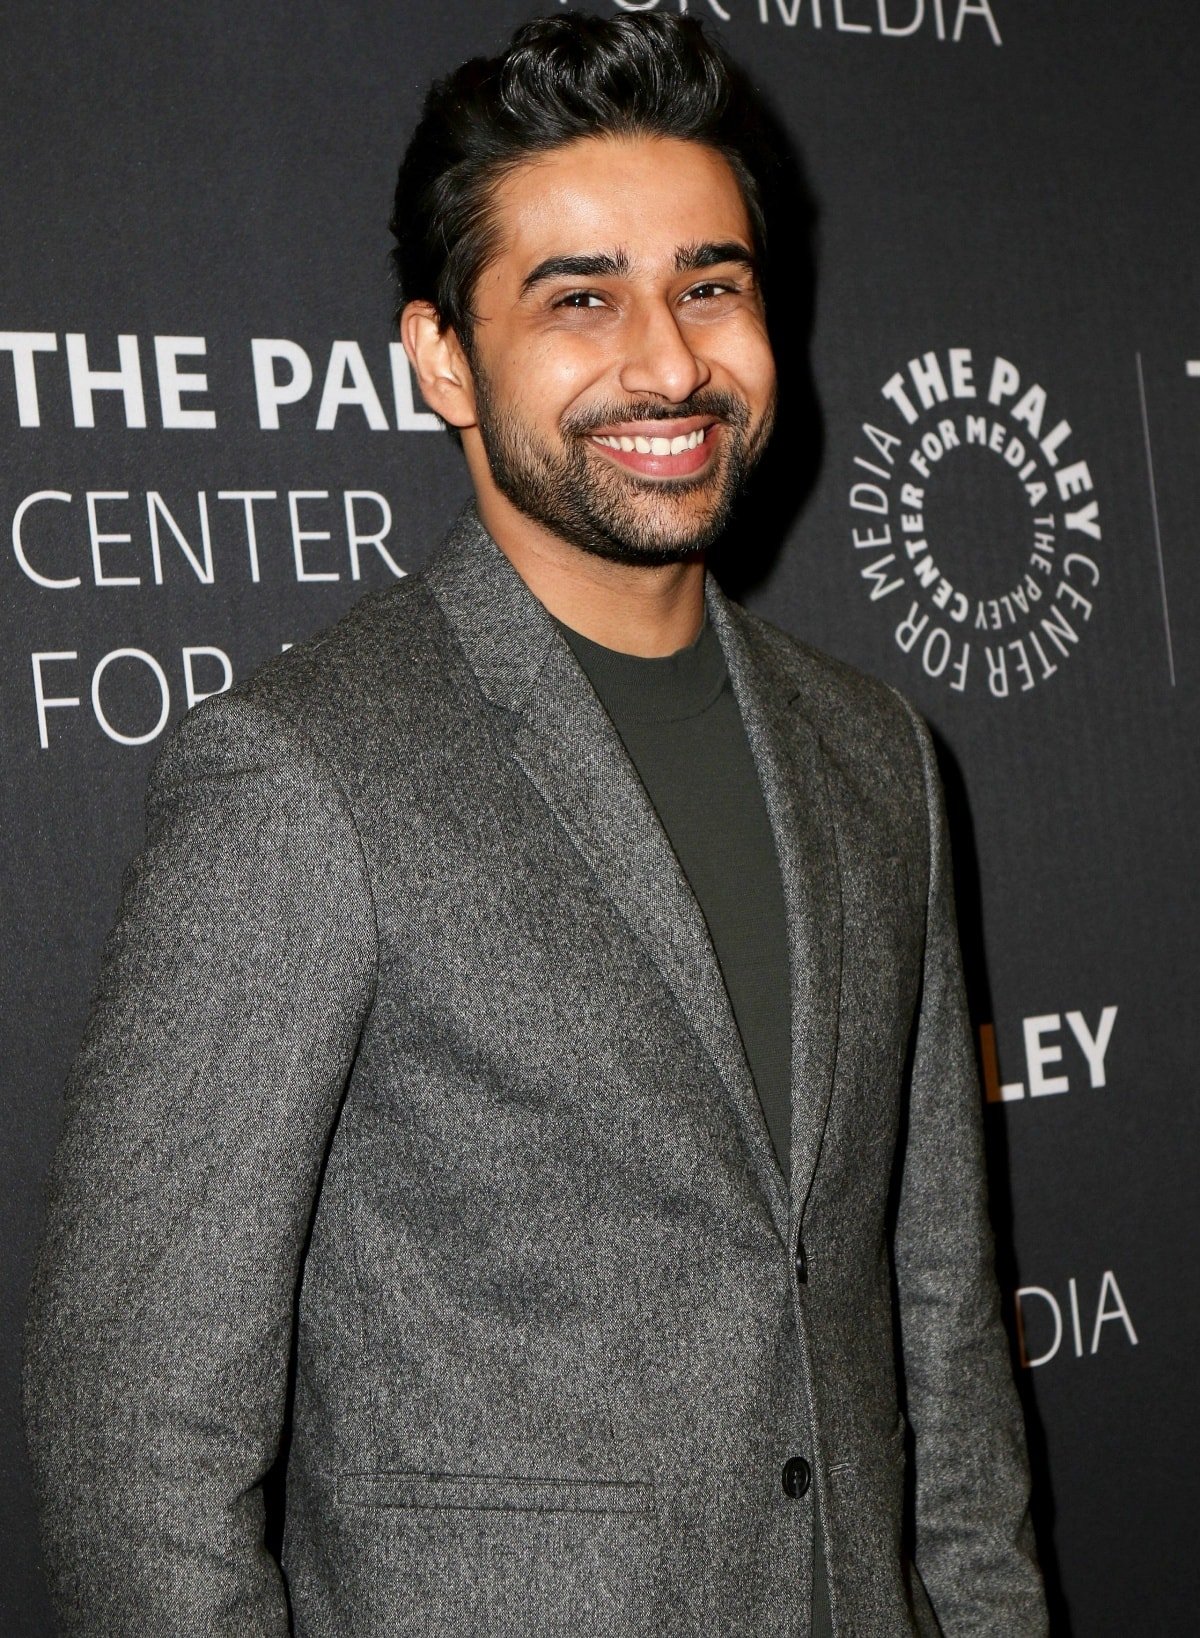 Joining the cast of The God Friended Me, Suraj Sharma made an appearance during PaleyFest